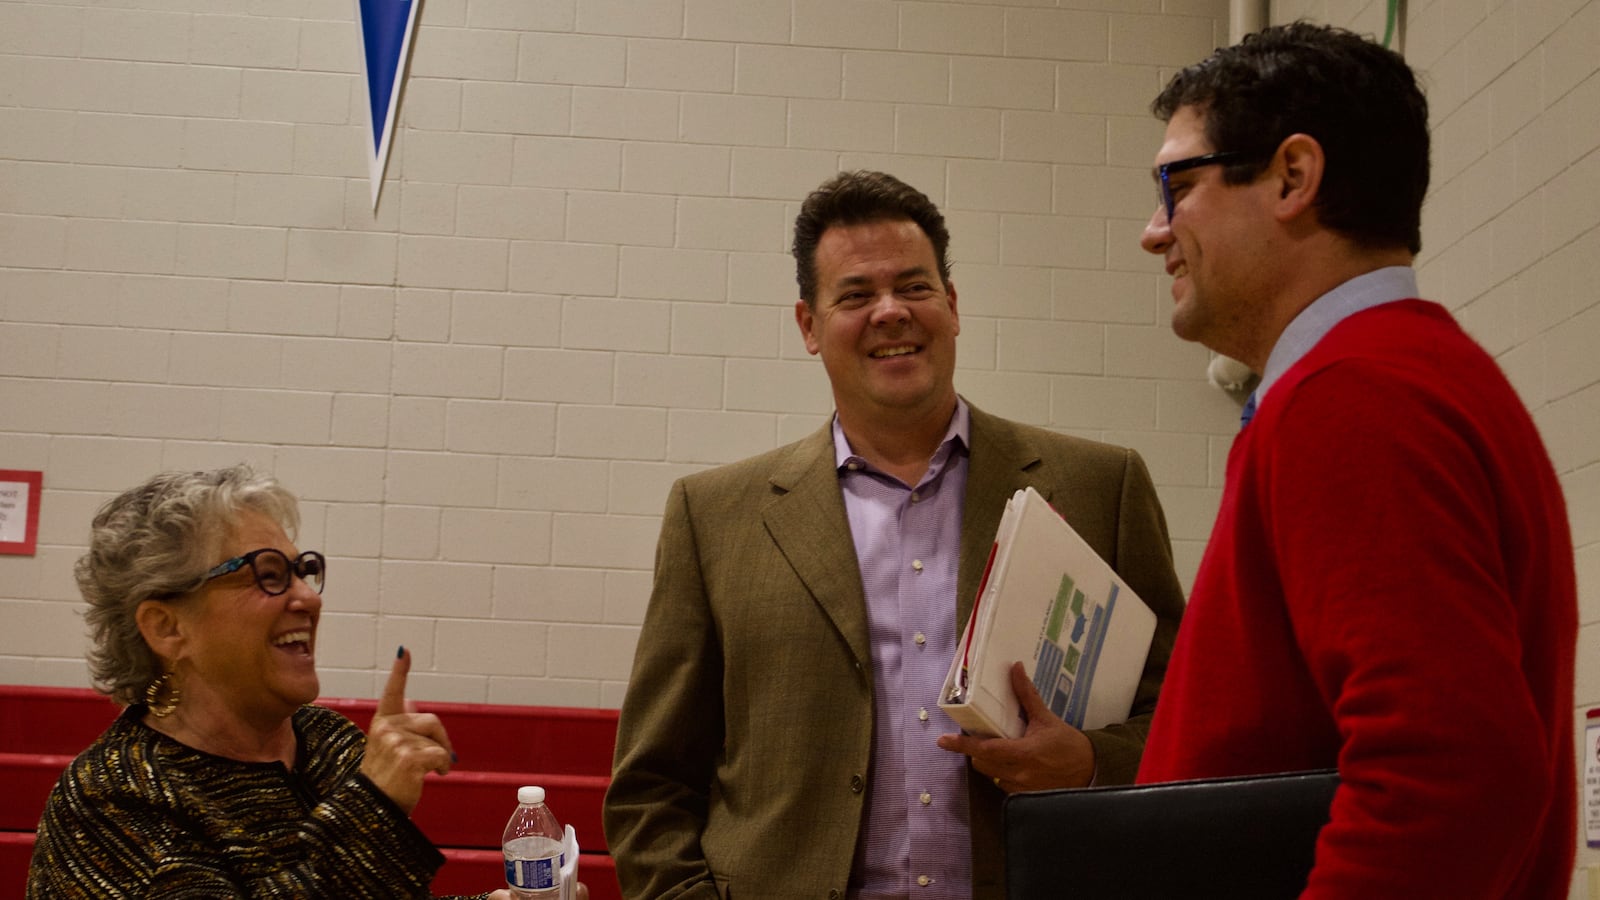 Douglas County school board candidates Chris Schor, left, Grant Nelson and Ryan Abresch chat before a candidate forum. Schor is a member of the "CommUnity Matters" slate, while Nelson and Abresch are members of the "Elevate Douglas County" slate. (Photo by Nic Garcia)